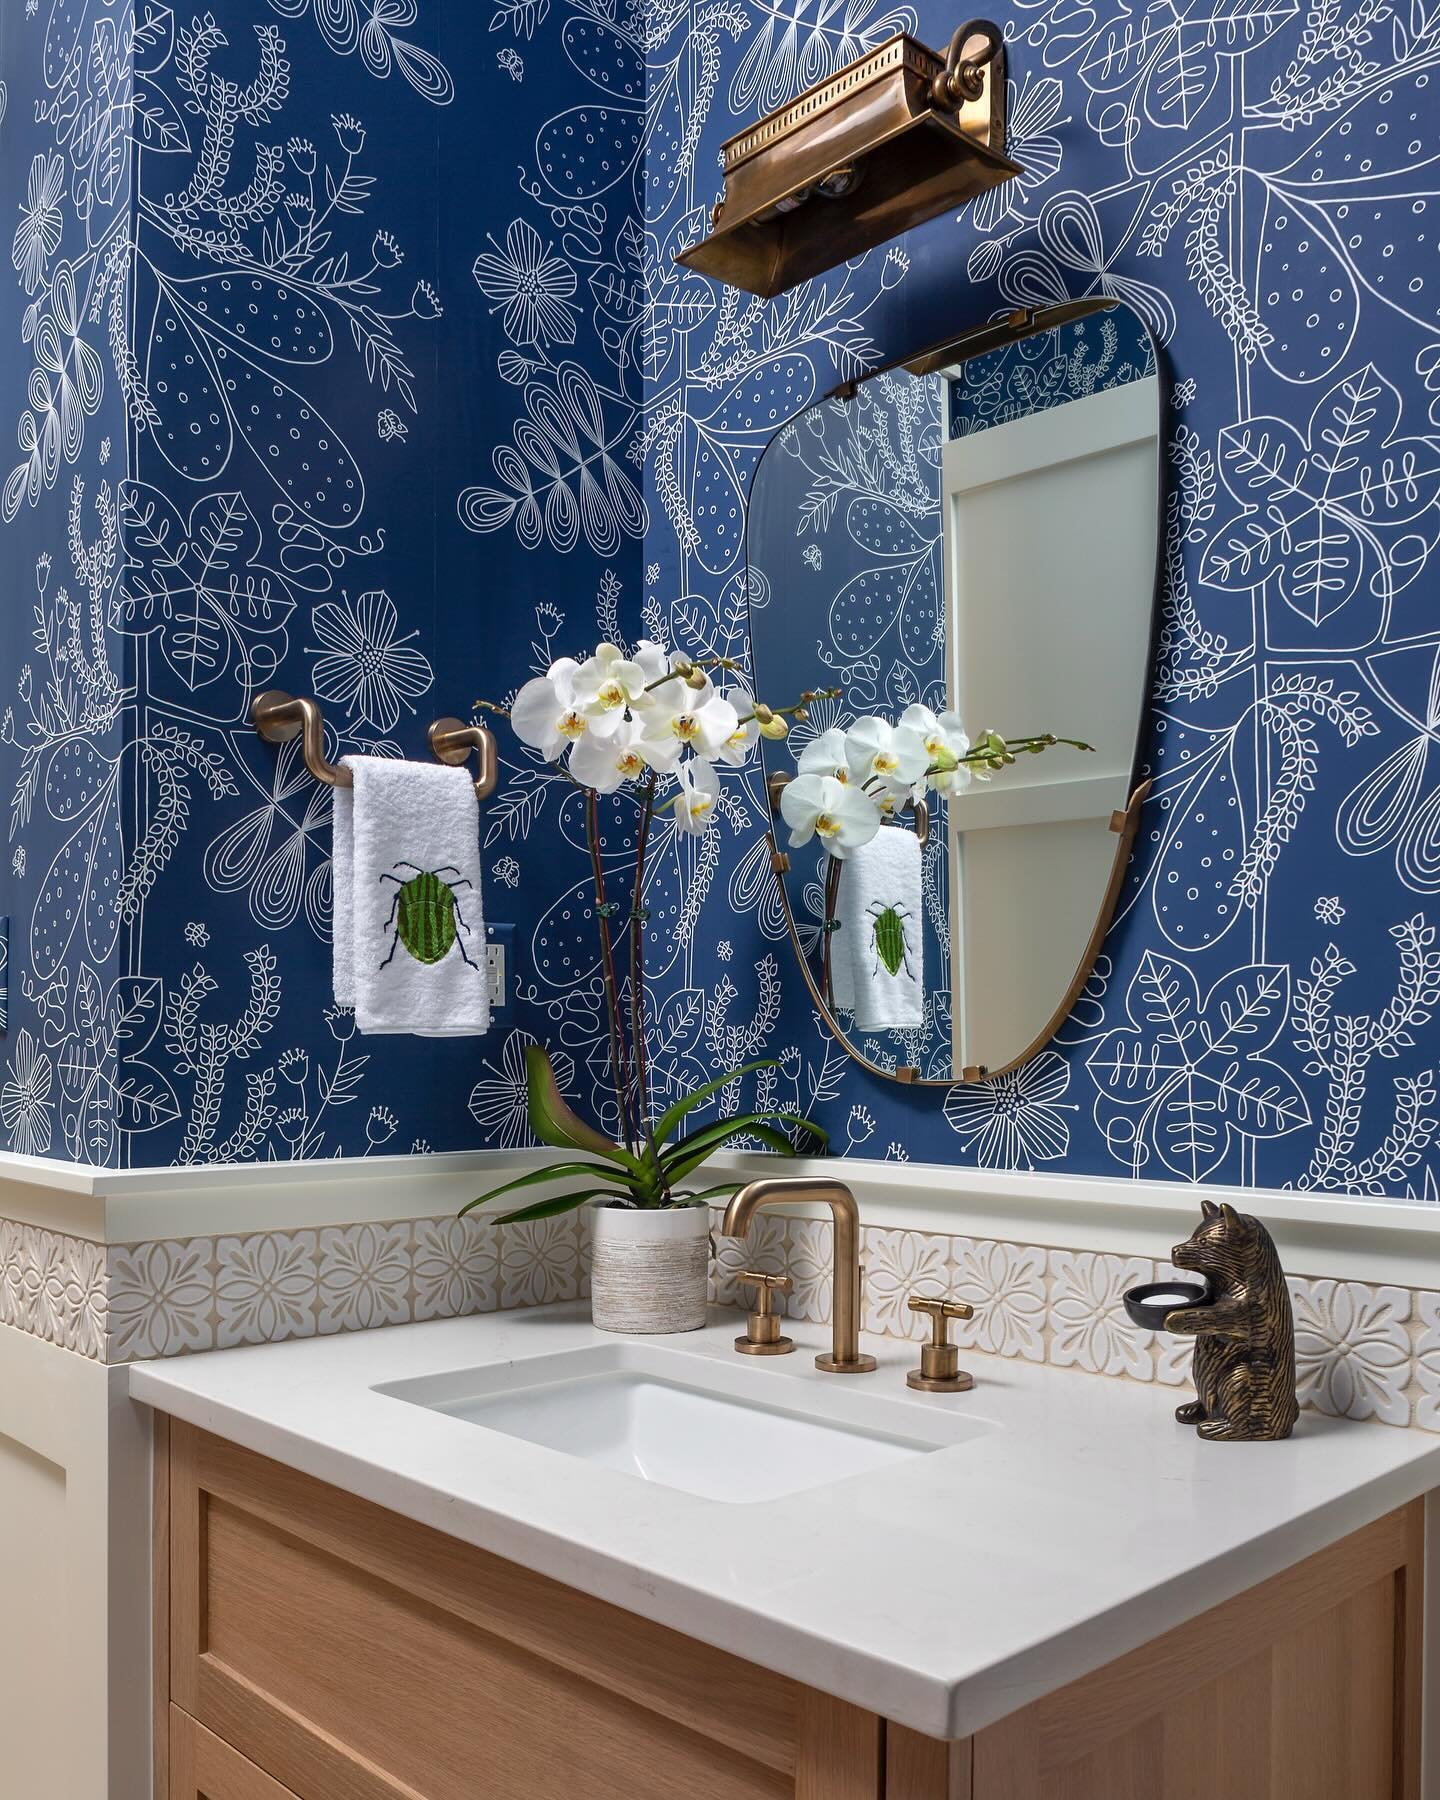 Two pretty powder rooms in one beautiful home. Which is more your vibe - 1 or 2? 💙

&mdash;
project: Earthy Wash Park New Build
interior design: Atelier Interior Design | Denver Interior Designer
photographer: @emredfield

#atelierdenver #atelierint